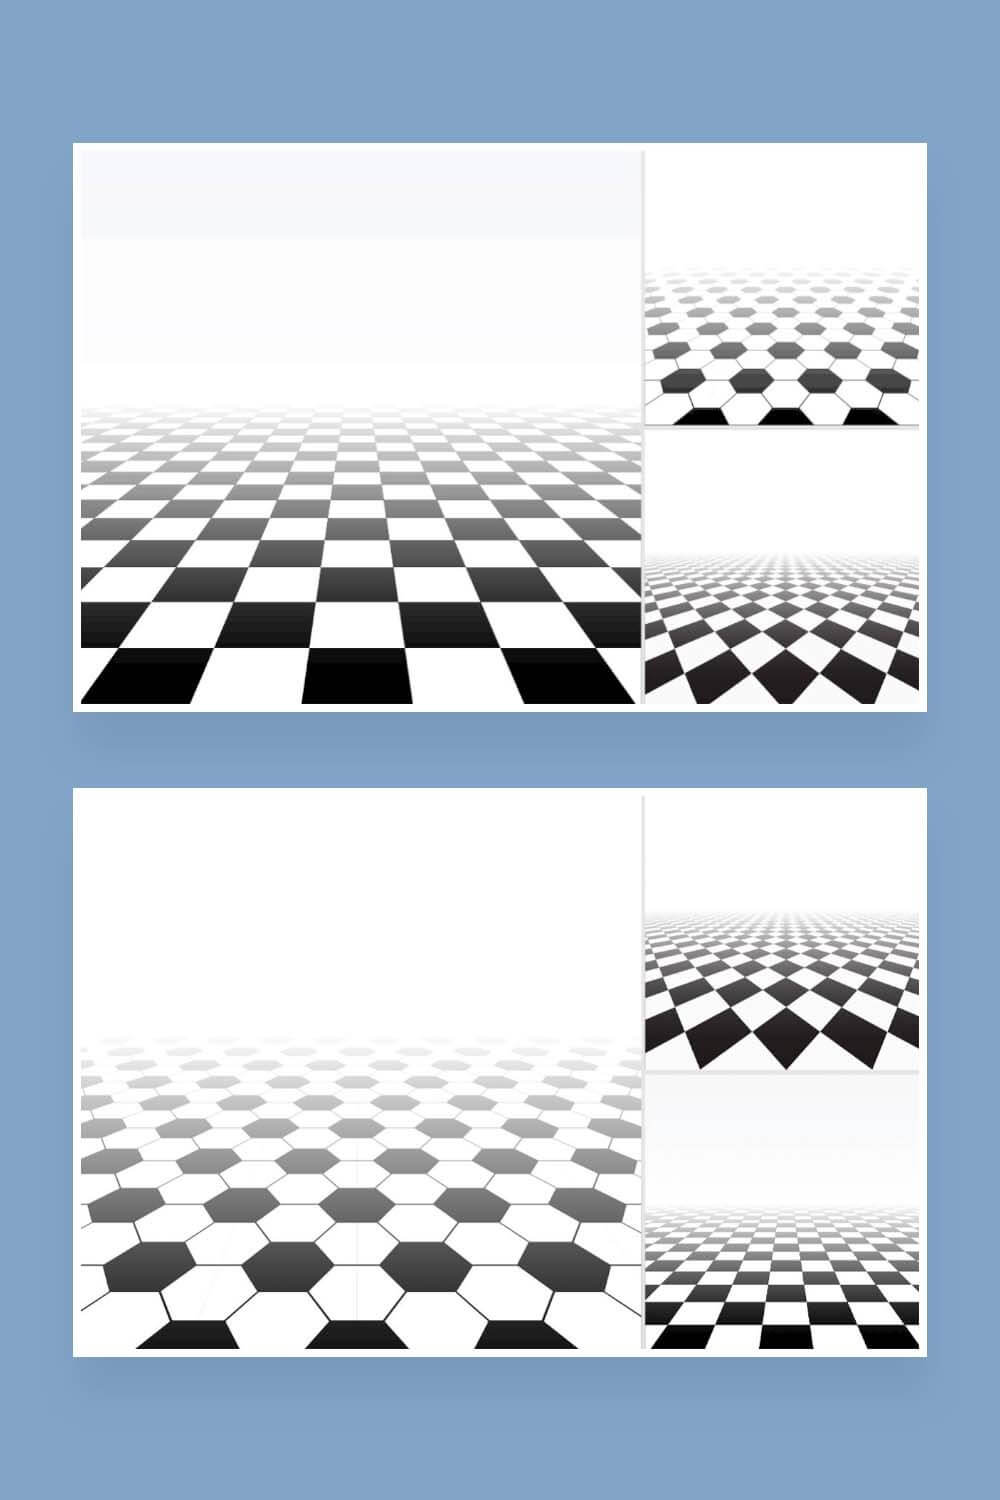 Abstract background with tiled floor perspective on two Pinterest images.